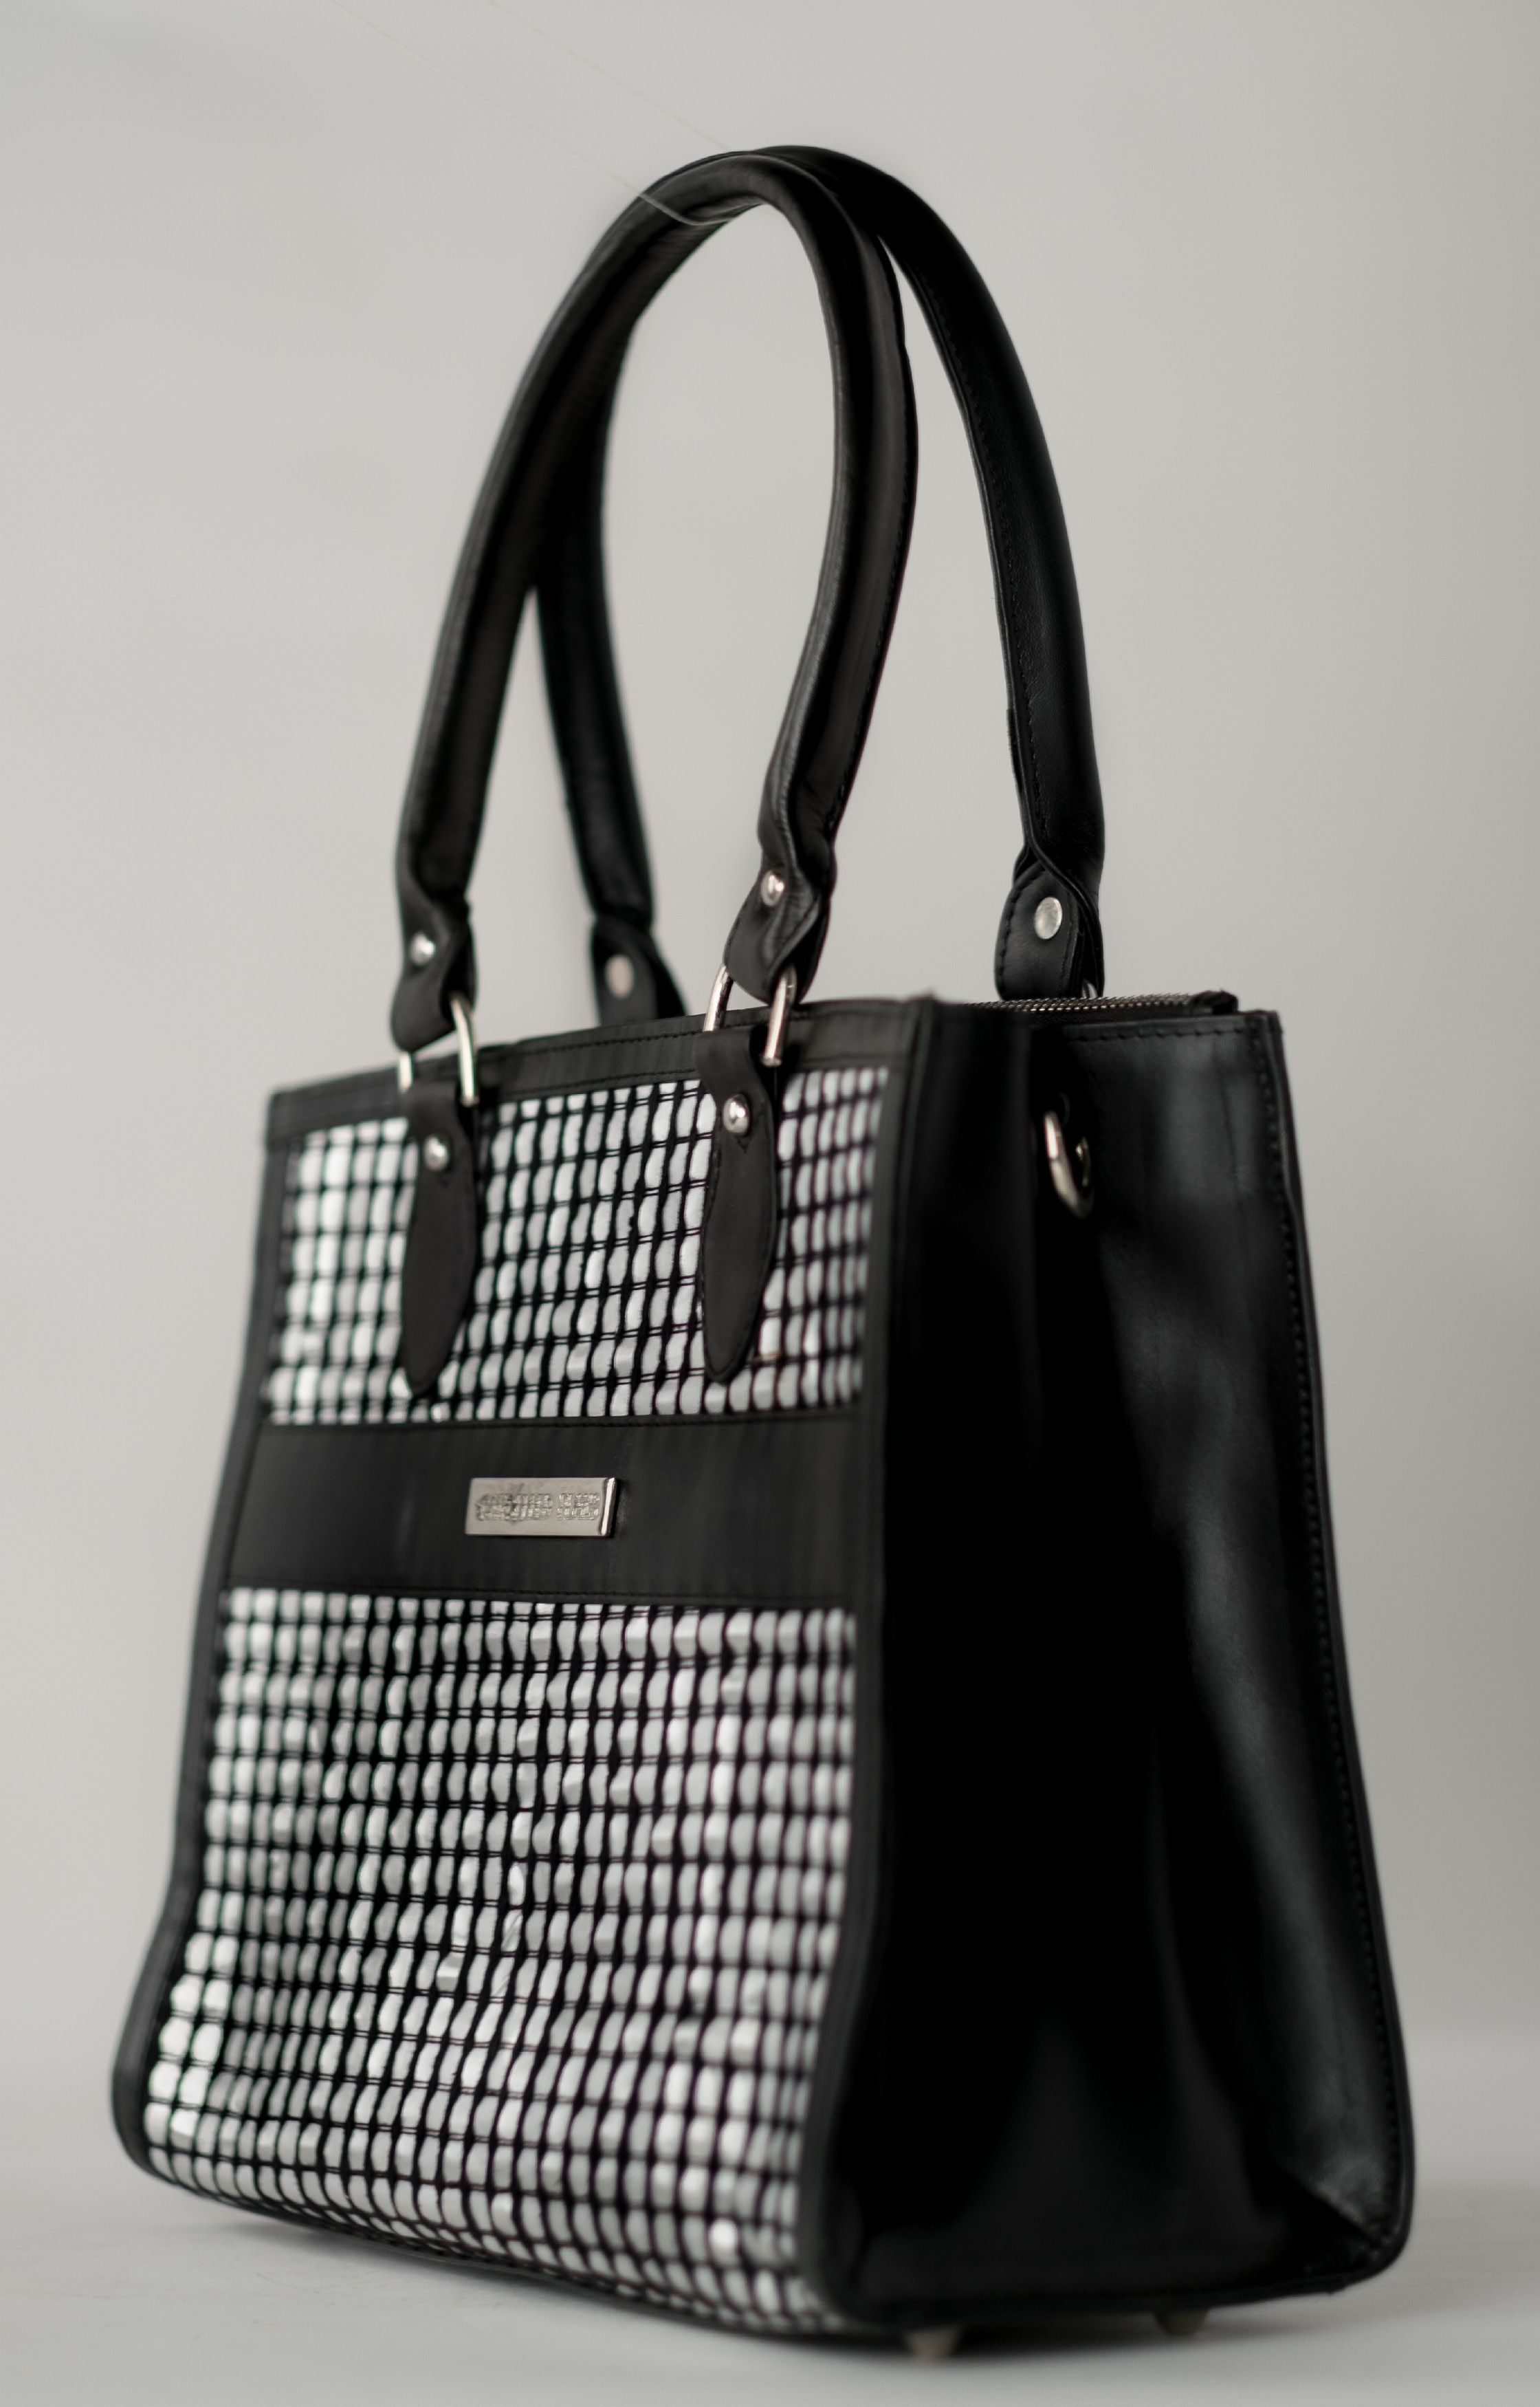 Cancelled Plans | Alu Tote undefined